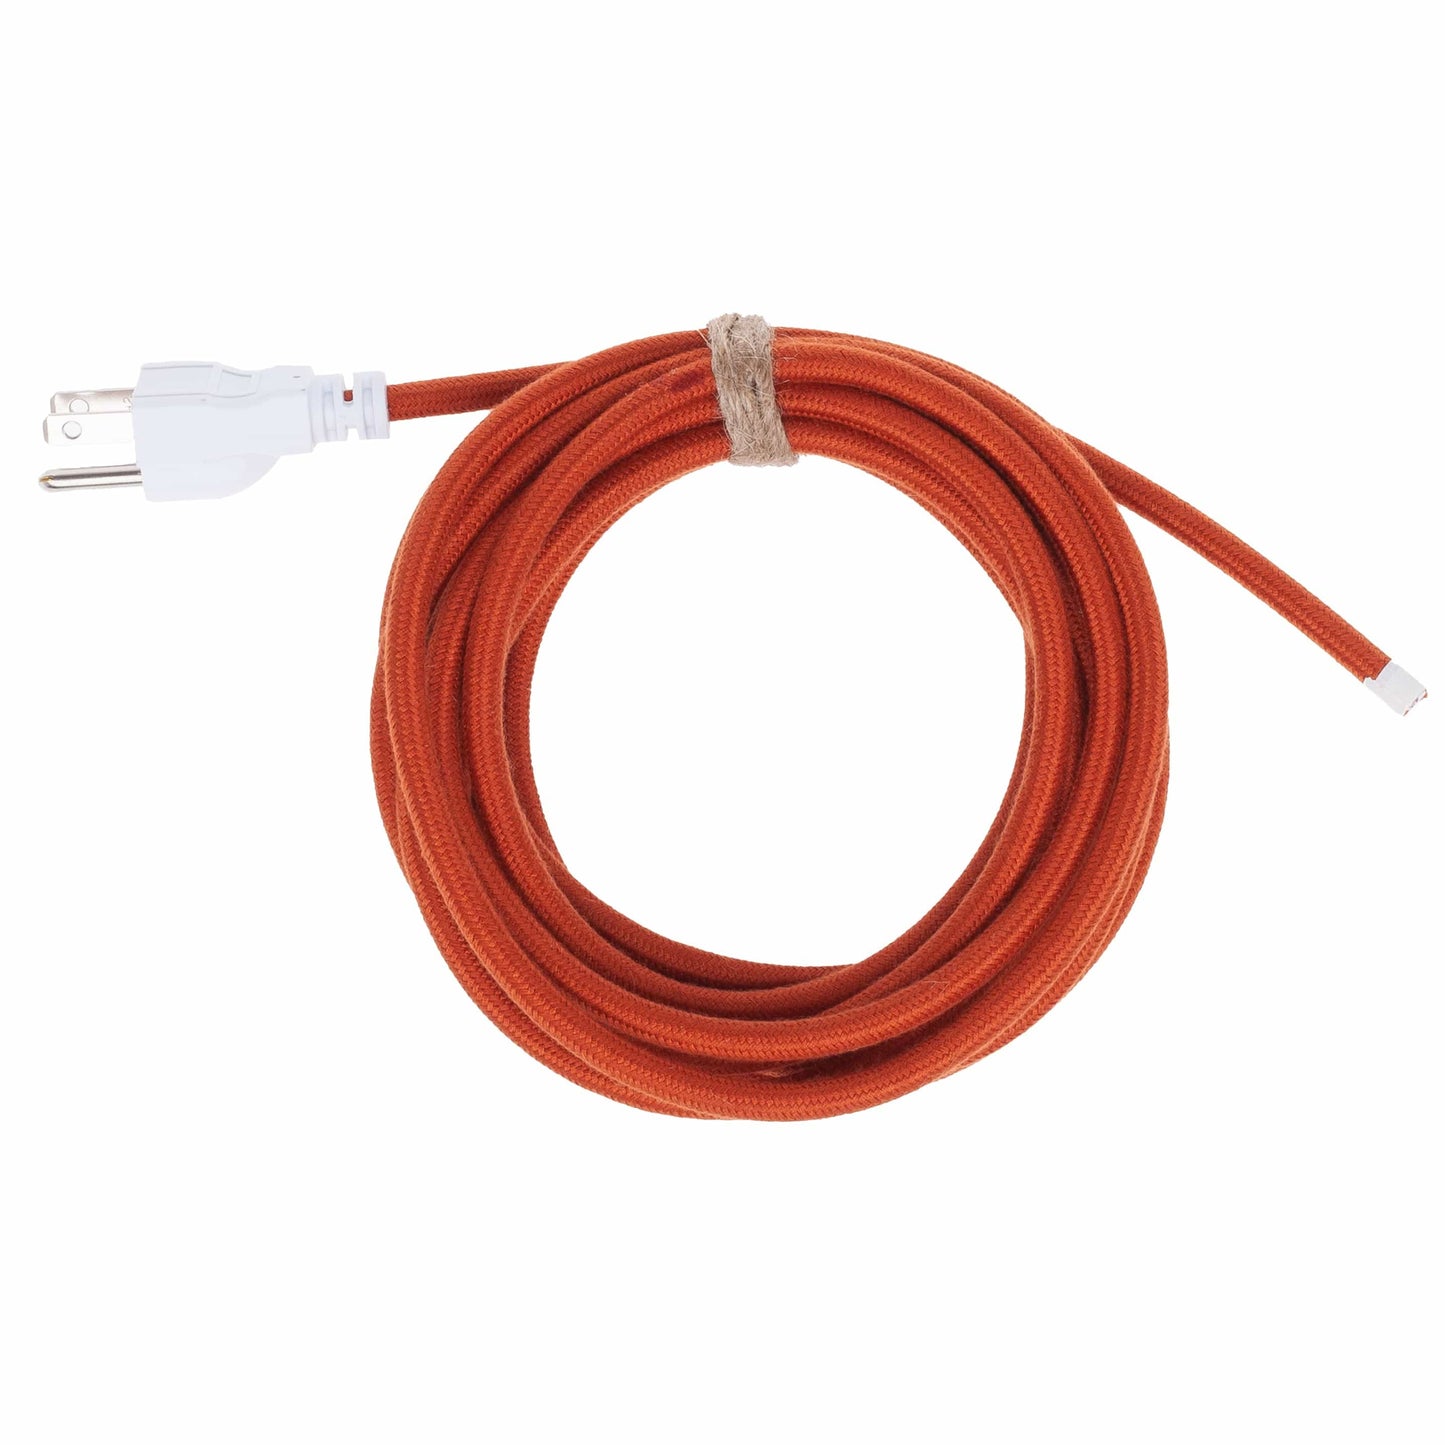 Customize: 3-Prong Power Cord Whip